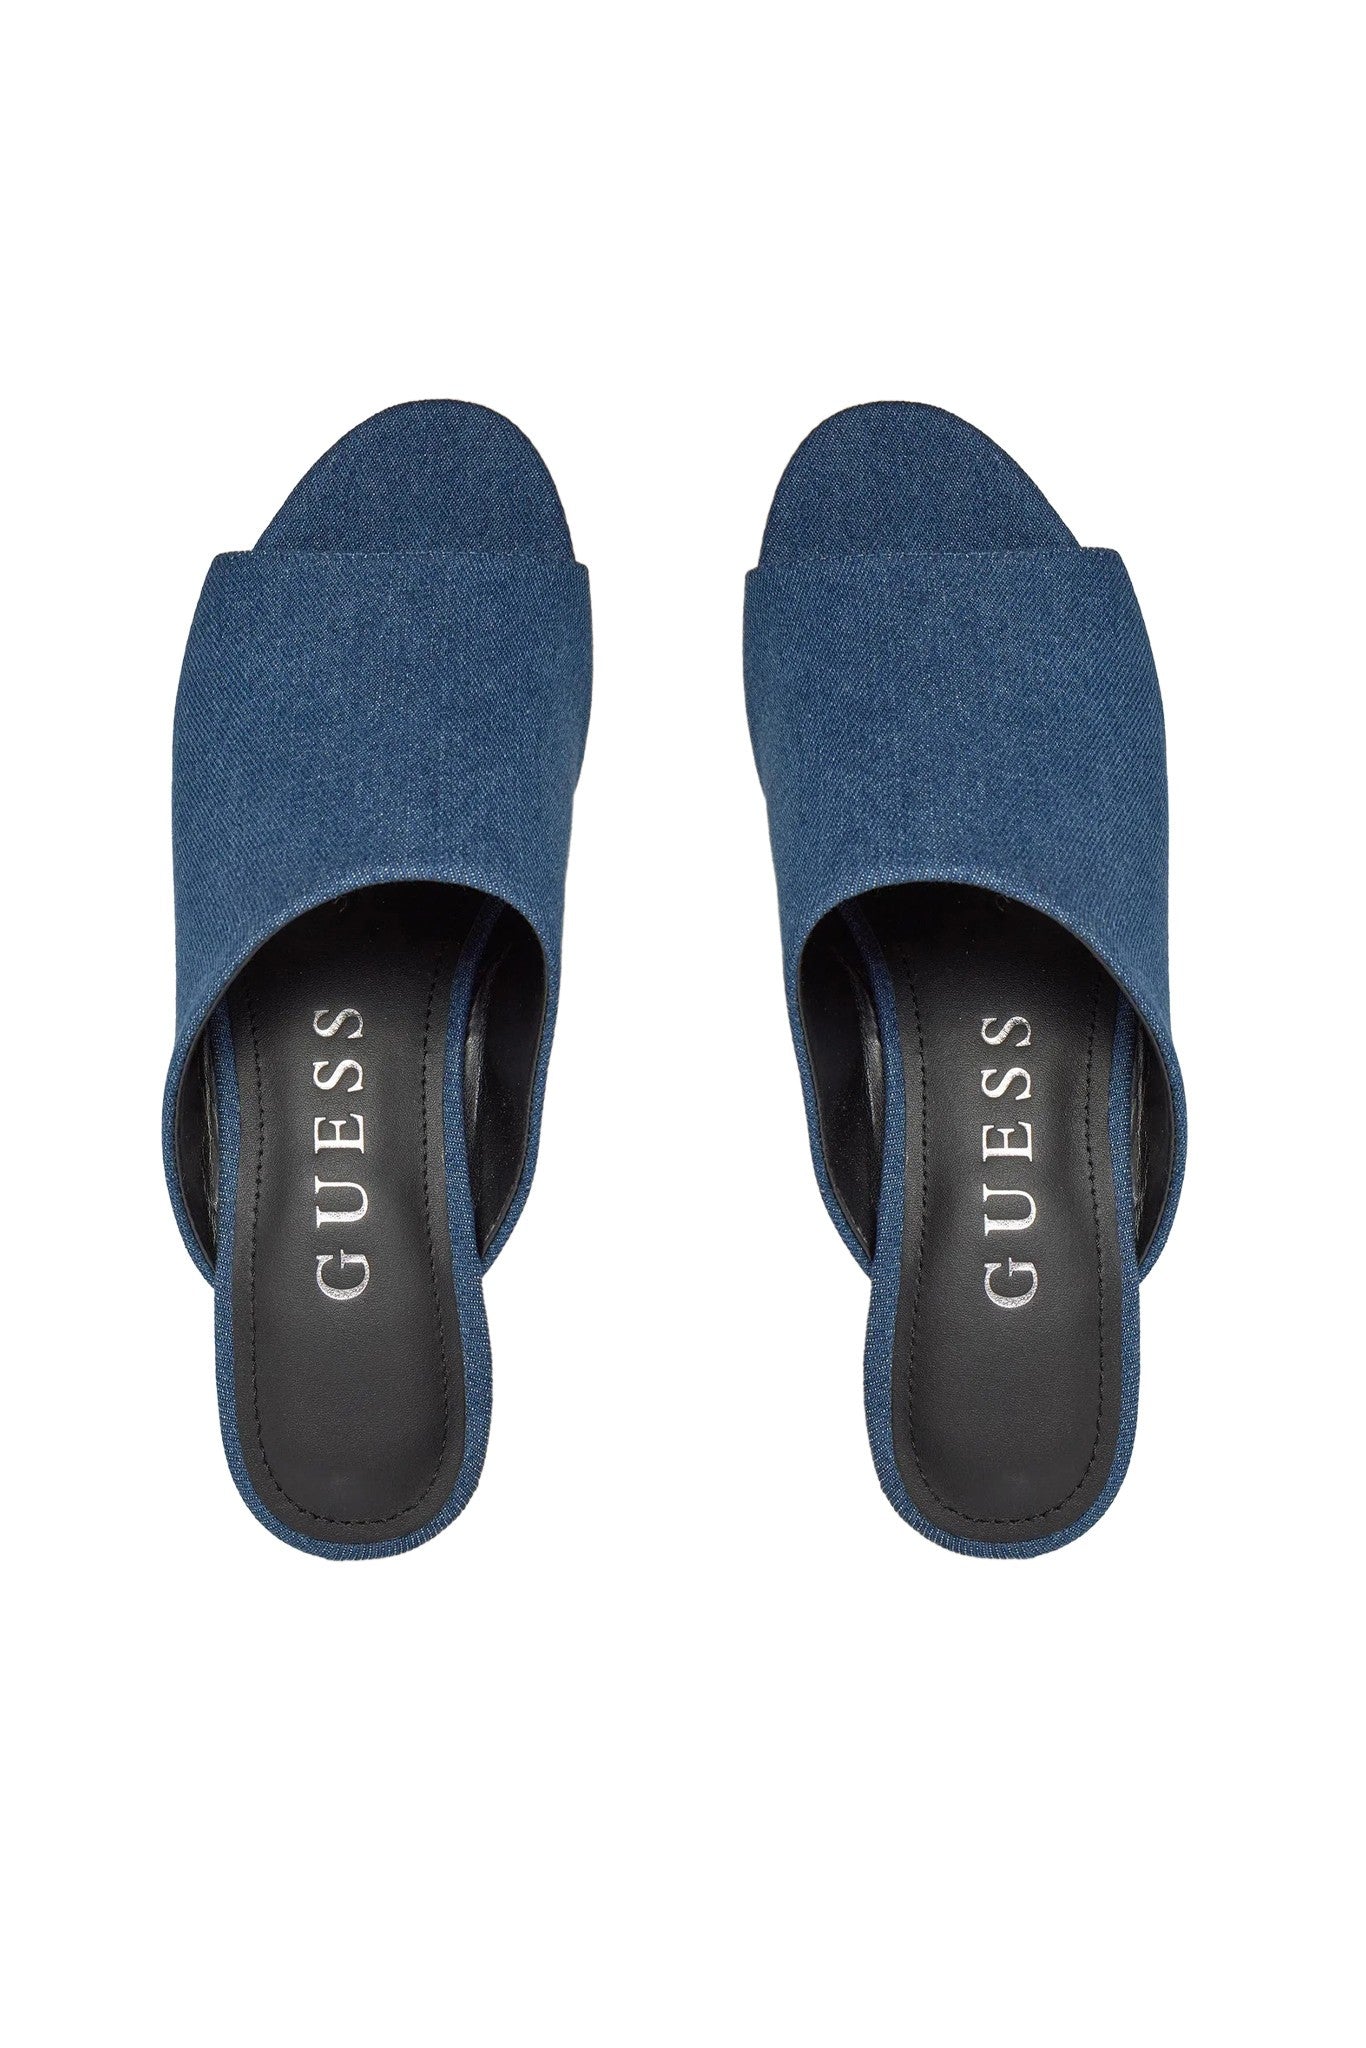 Guess Women Peep Toes Shoes